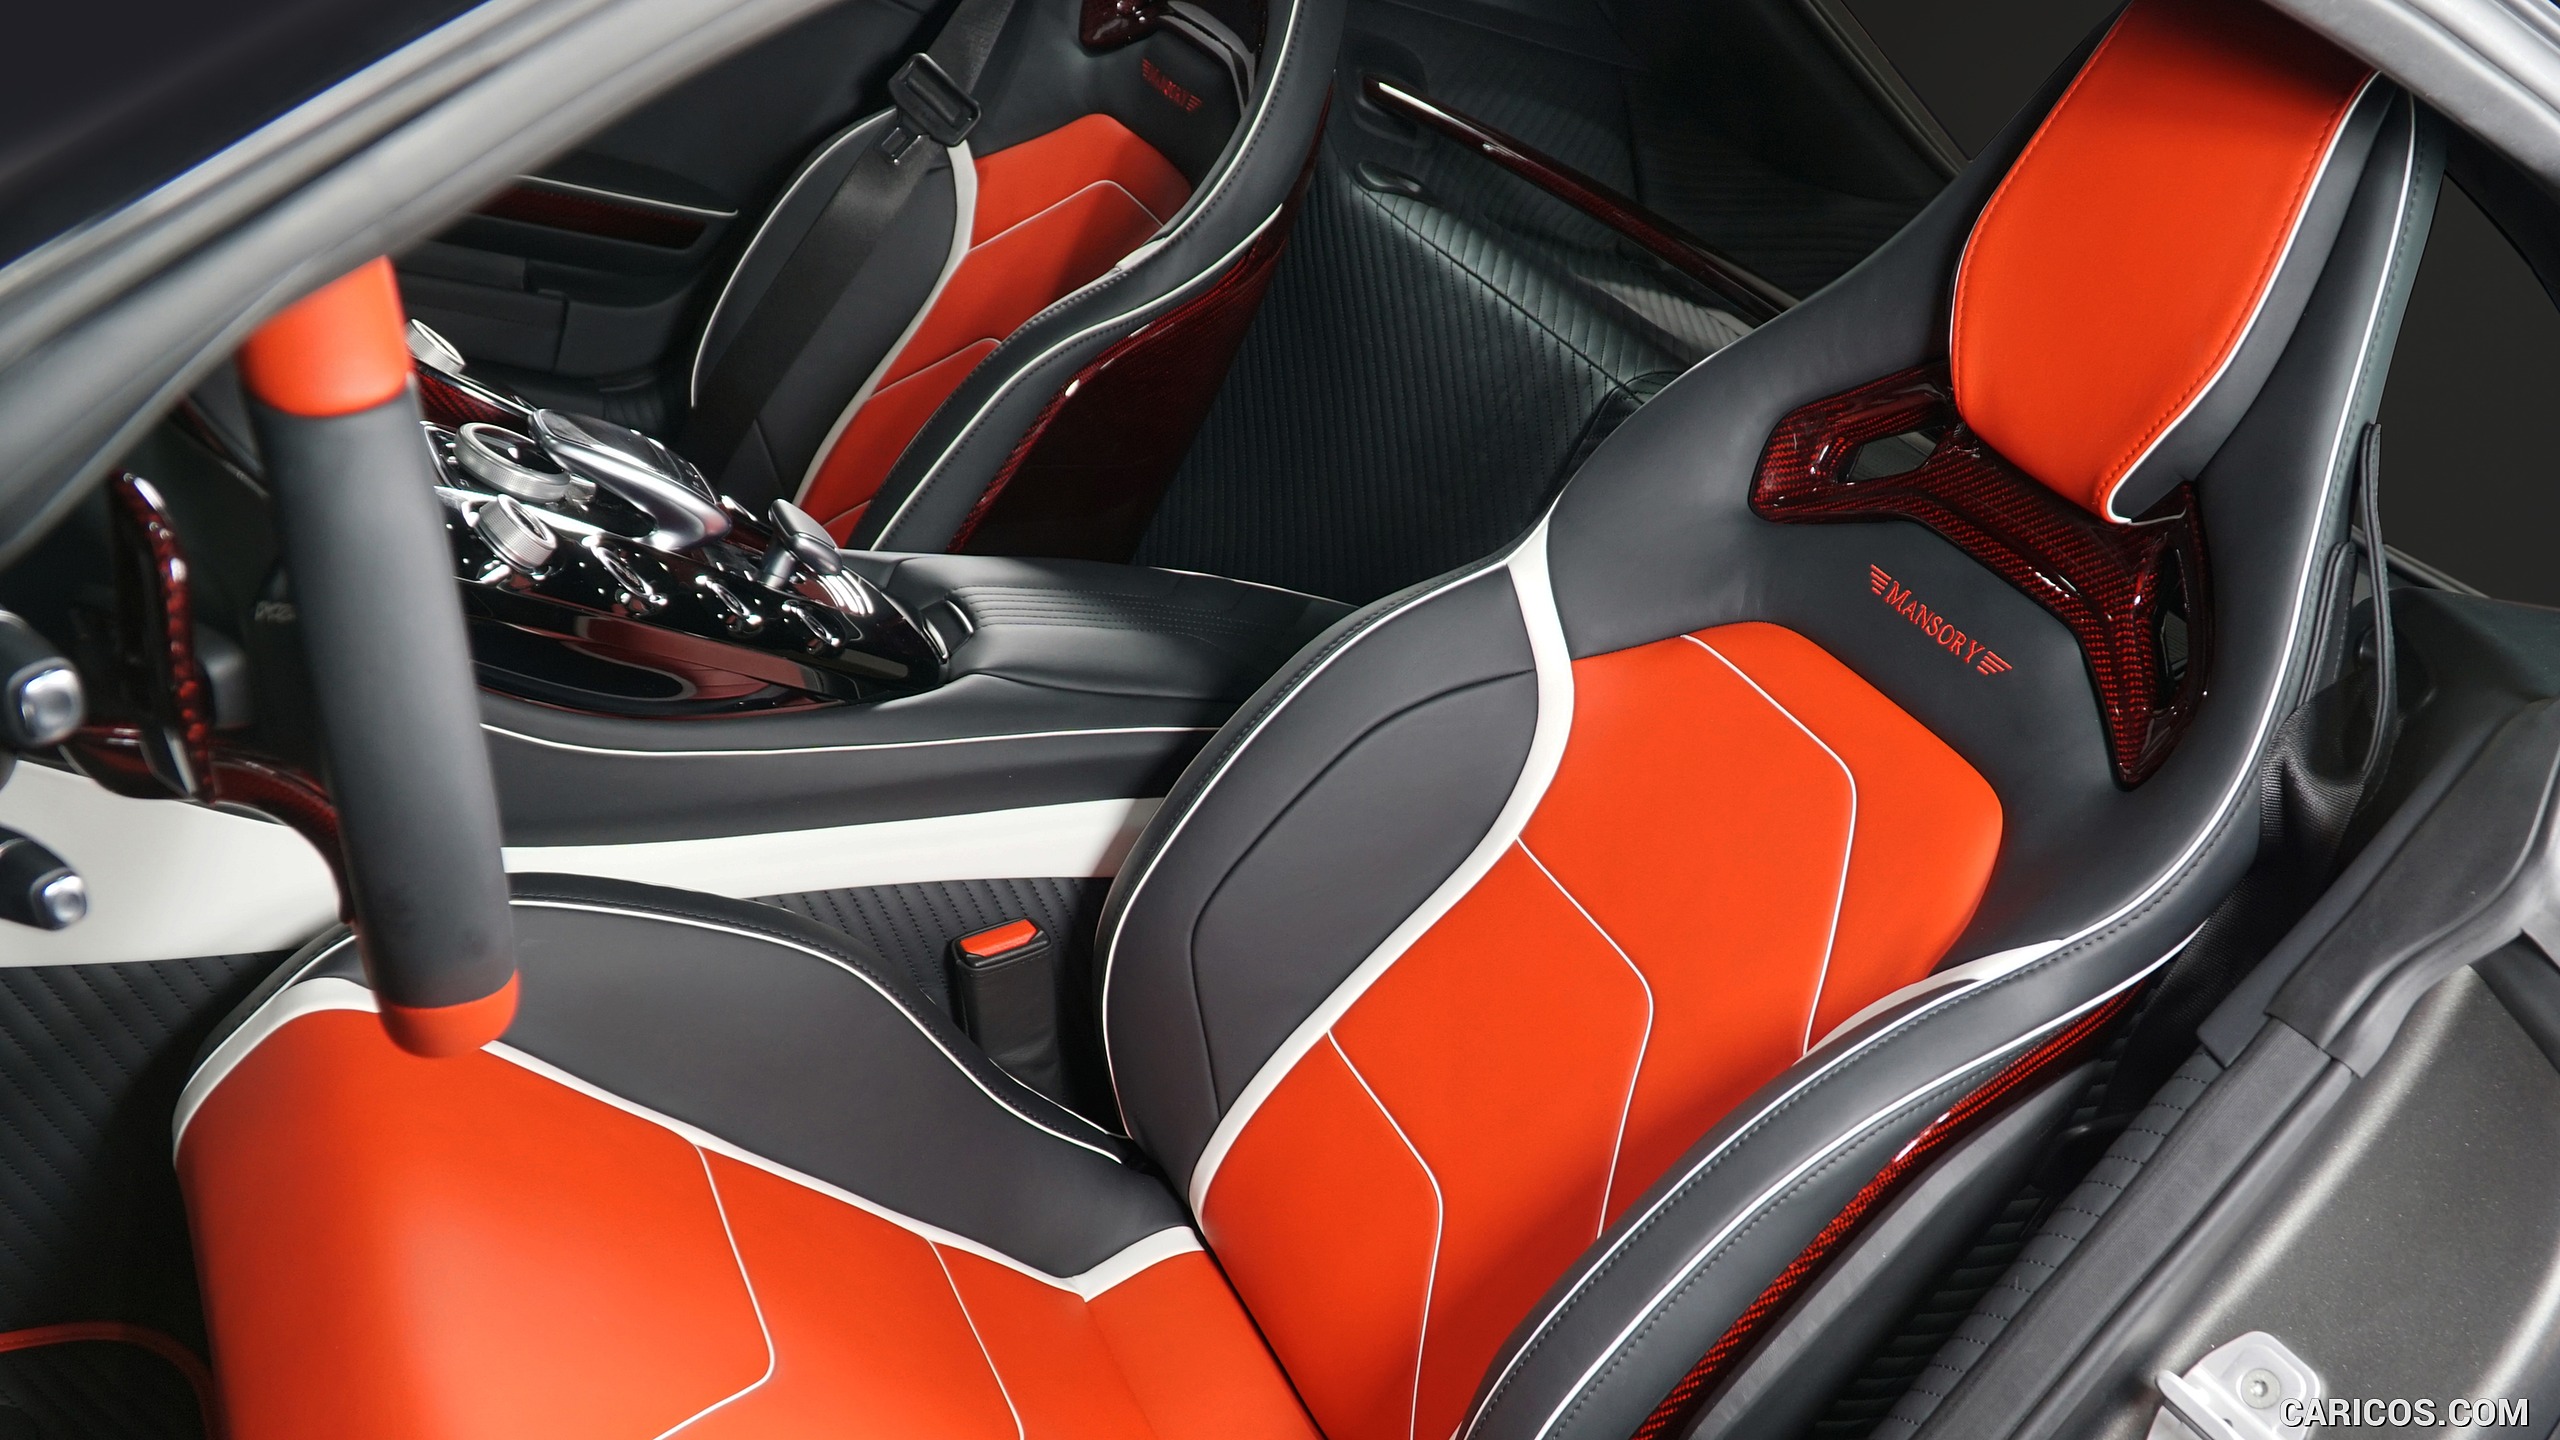 2016 MANSORY Mercedes-AMG GT S         - Interior, #8 of 10